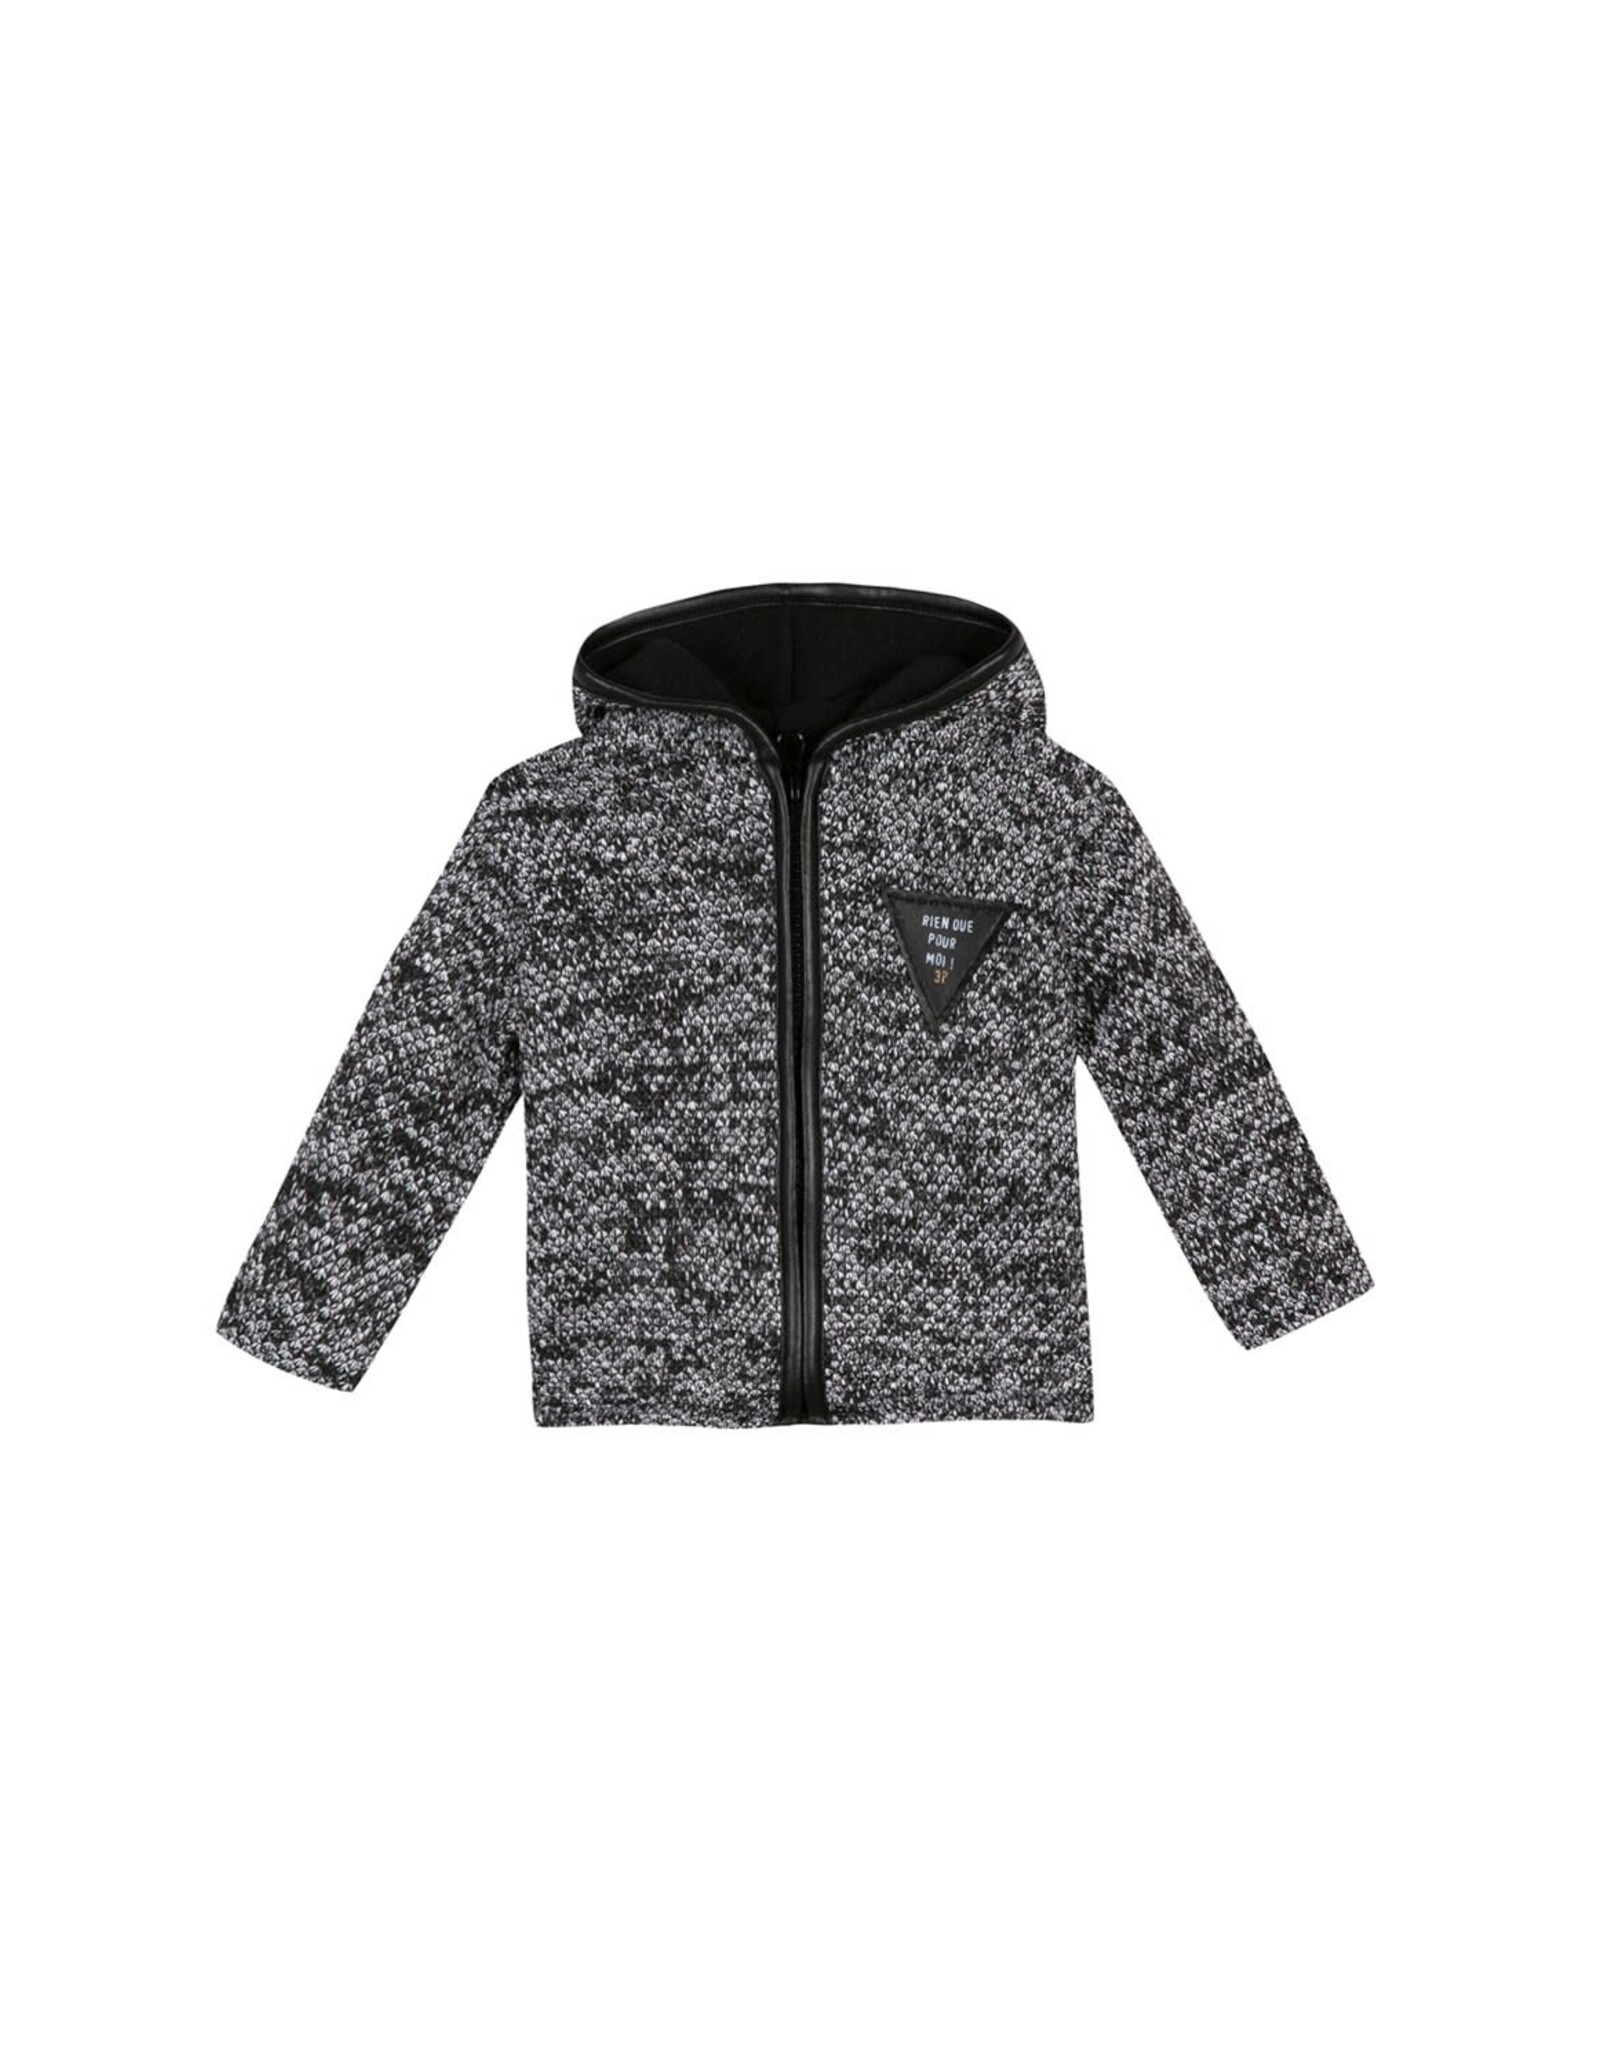 Rock Band Hooded Zip-up Sweater